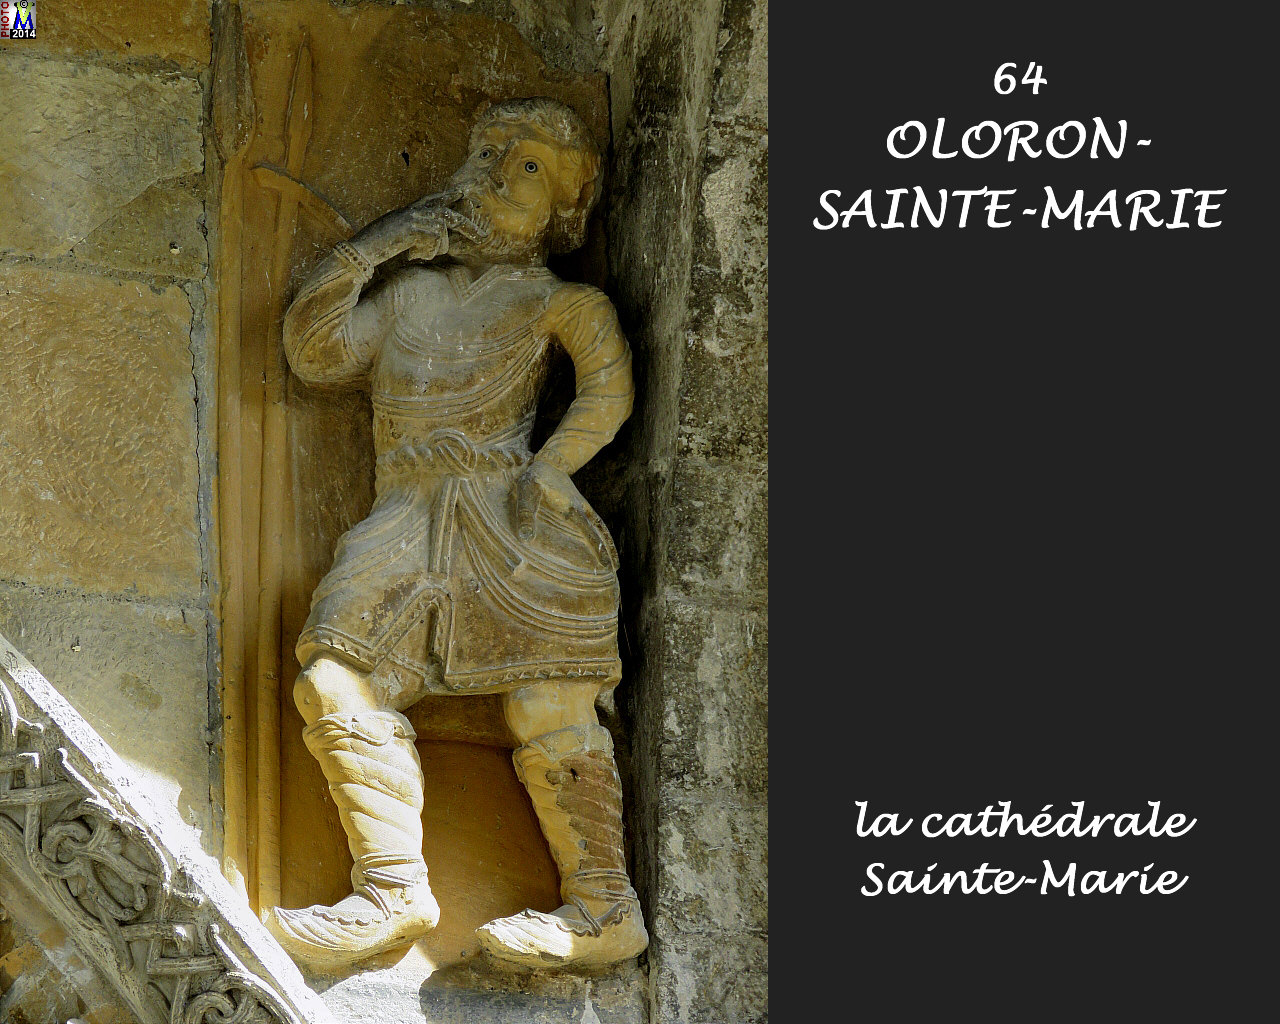 64OLORON-STE-MARIE_cathedrale_132.jpg